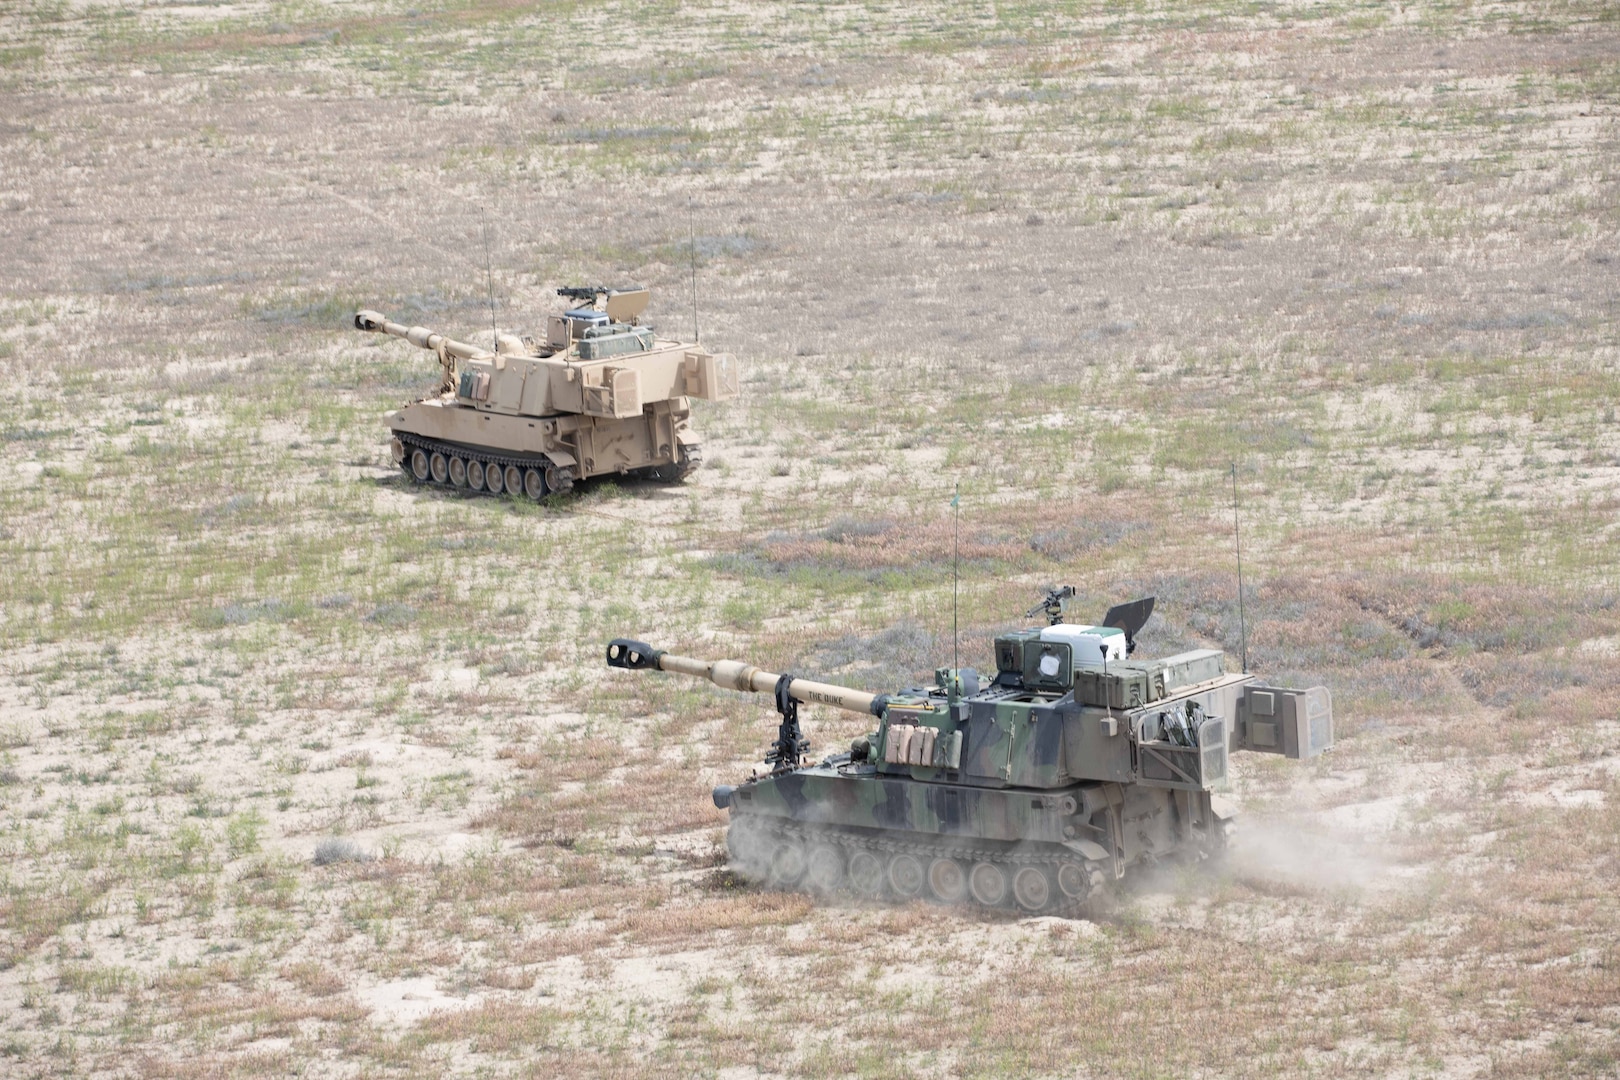 Two M109 Paladins move into firing position during exercise Western Strike 22 at Orchard Combat Training Center, Idaho, June 6, 2022. Several artillery units will certify themselves during the exercise, ensuring they are ready to be called up to support operations worldwide.